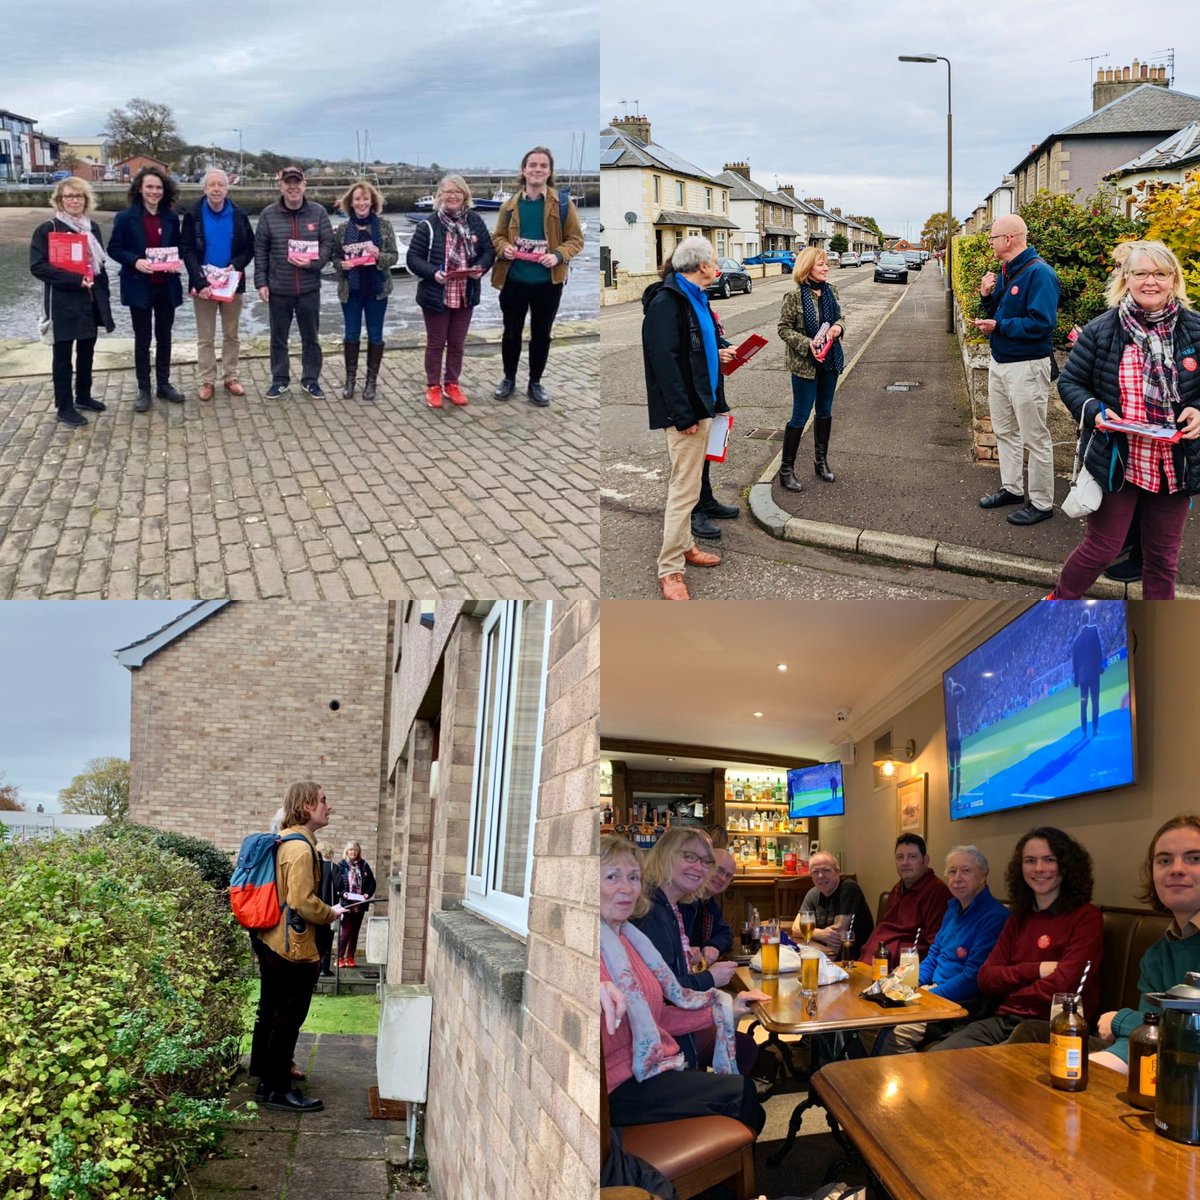 Great campaigning day in Musselburgh with @CllrForrest lots of good conversations, folk fed up and ready for change. Post campaigning drink at fantastic local business The Ship Inn #labourdoorstep